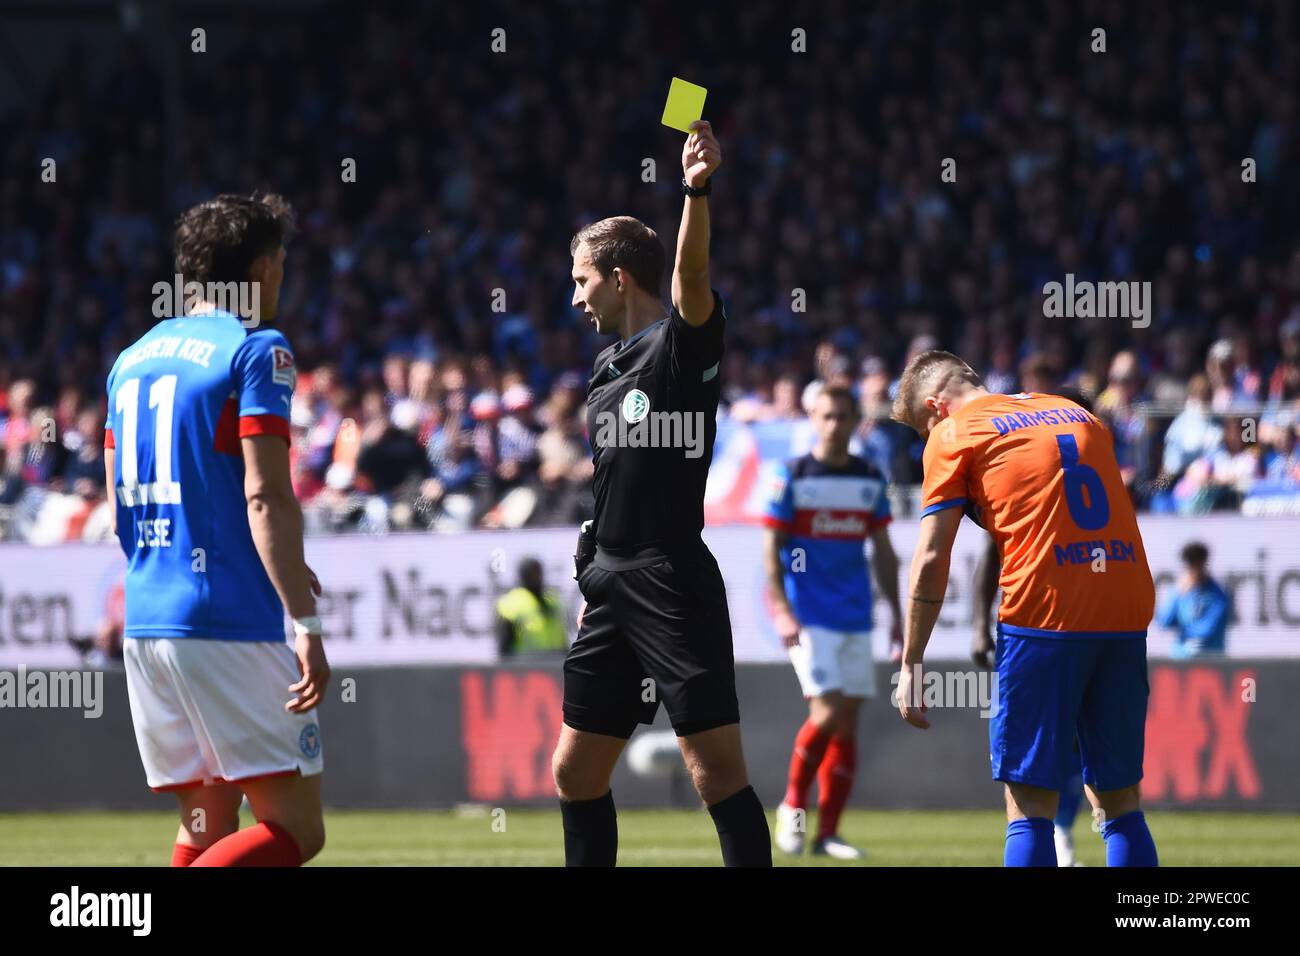 Kiel, Germany. 30th Apr, 2023. Soccer: 2. Bundesliga, Holstein Kiel - Darmstadt 98, Matchday 30, Holstein Stadium. Referee Florian Heft (M) cautions Darmstadt's Marvin Mehlem (r) after a foul. Credit: Gregor Fischer/dpa - IMPORTANT NOTE: In accordance with the requirements of the DFL Deutsche Fußball Liga and the DFB Deutscher Fußball-Bund, it is prohibited to use or have used photographs taken in the stadium and/or of the match in the form of sequence pictures and/or video-like photo series./dpa/Alamy Live News Stock Photo